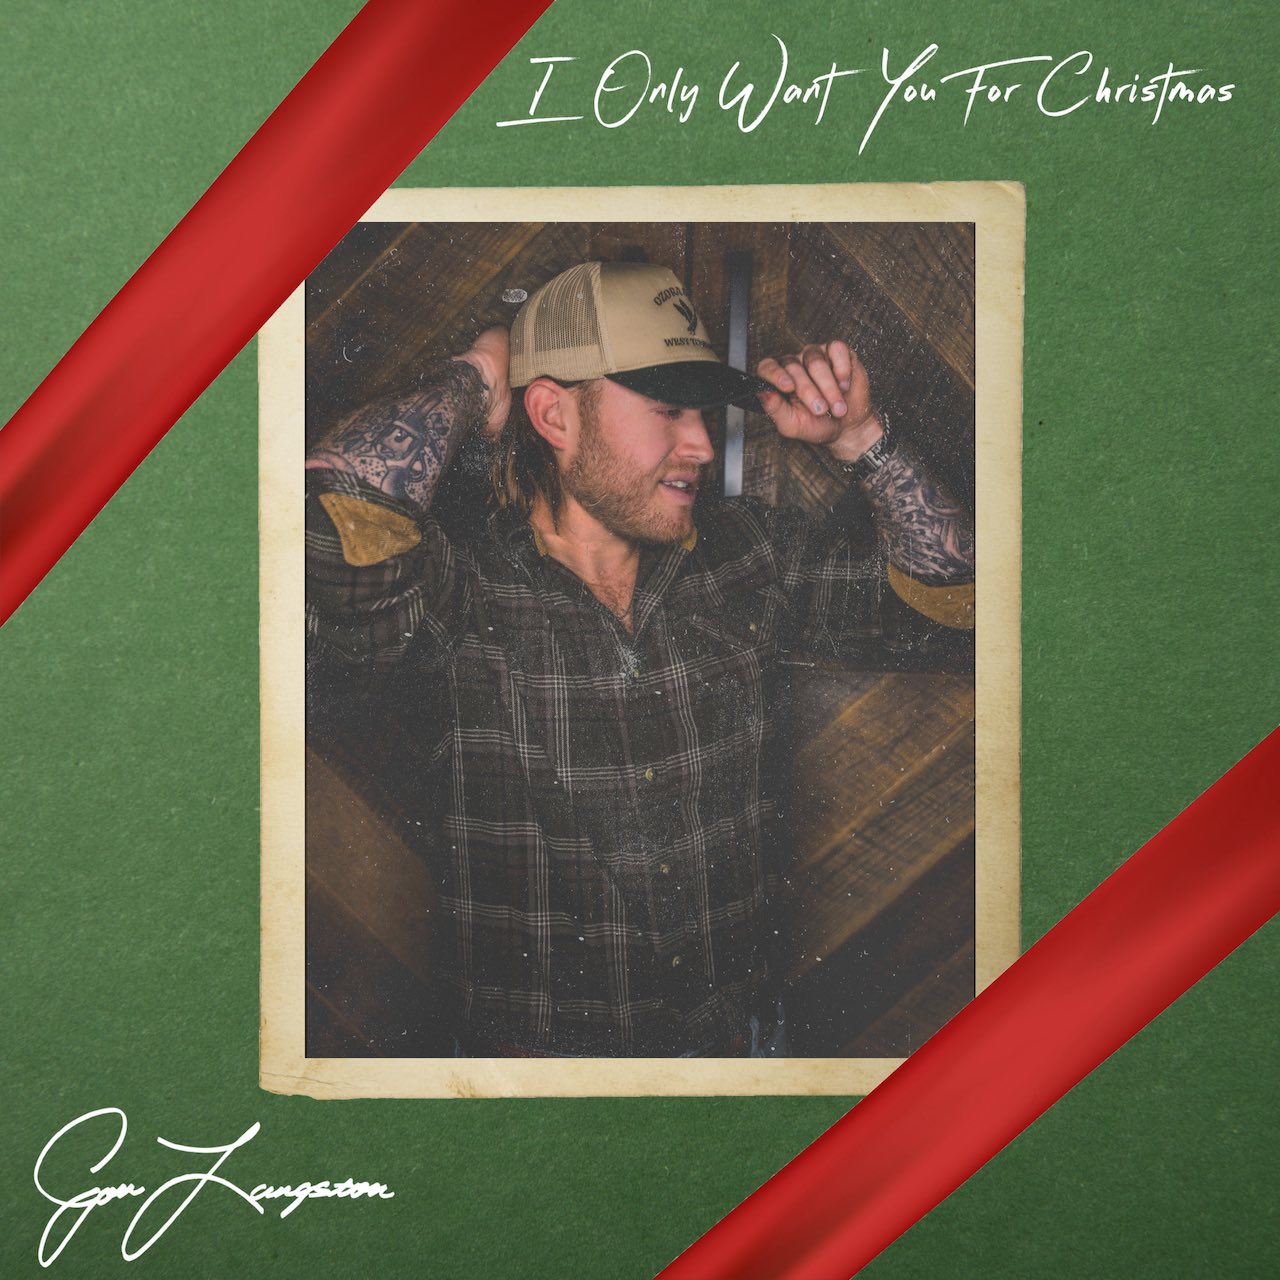 Jon Langston Gets Into Country’s Holiday Spirit With Alan Jackson Cover